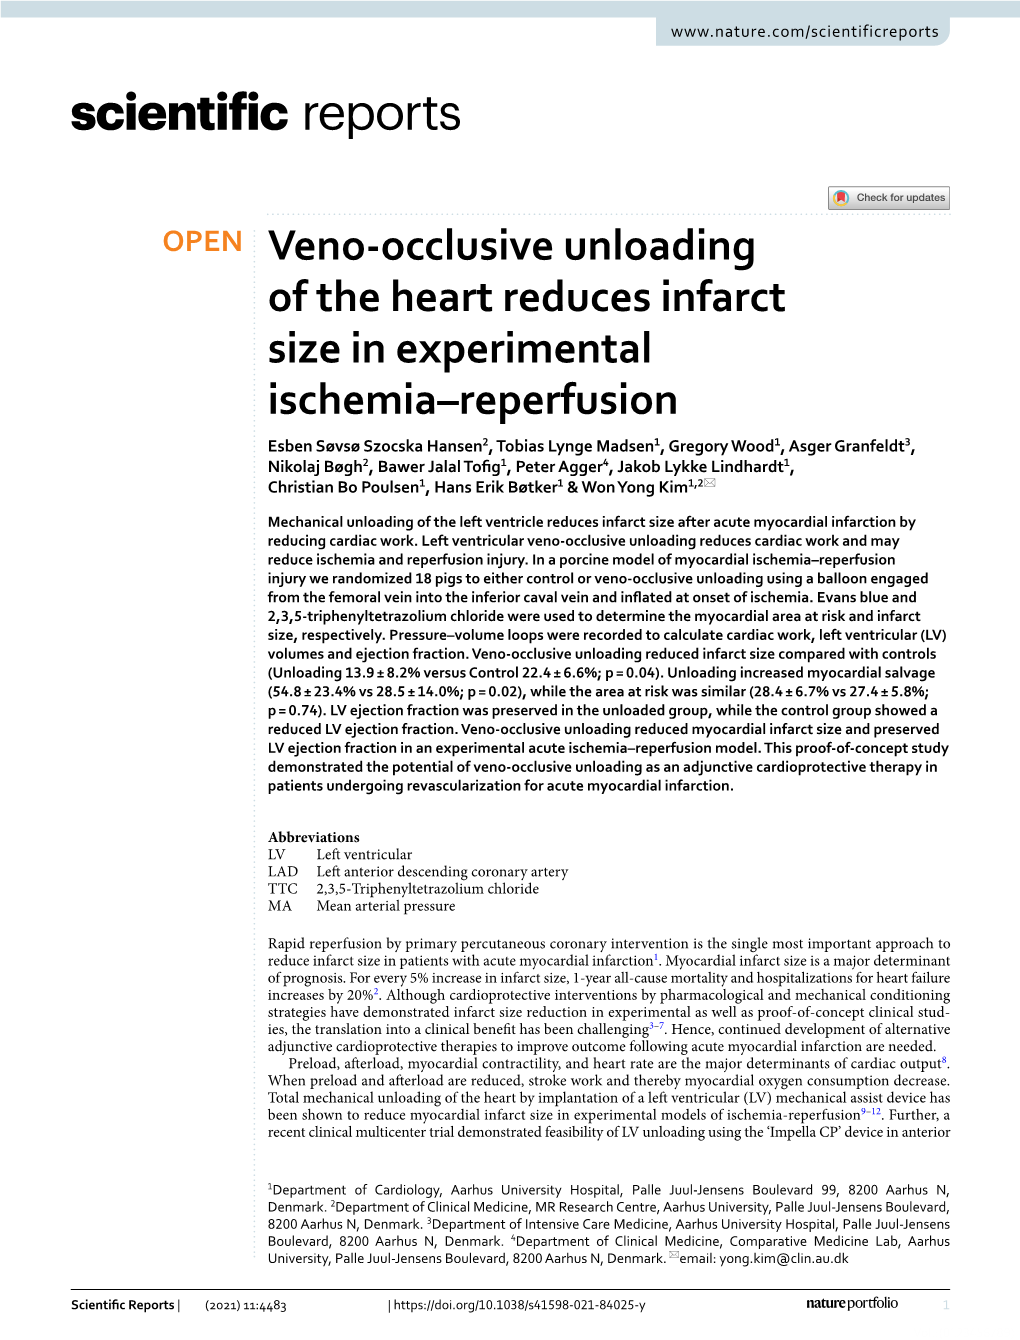 Veno-Occlusive Unloading of the Heart Reduces Infarct Size in Experimental